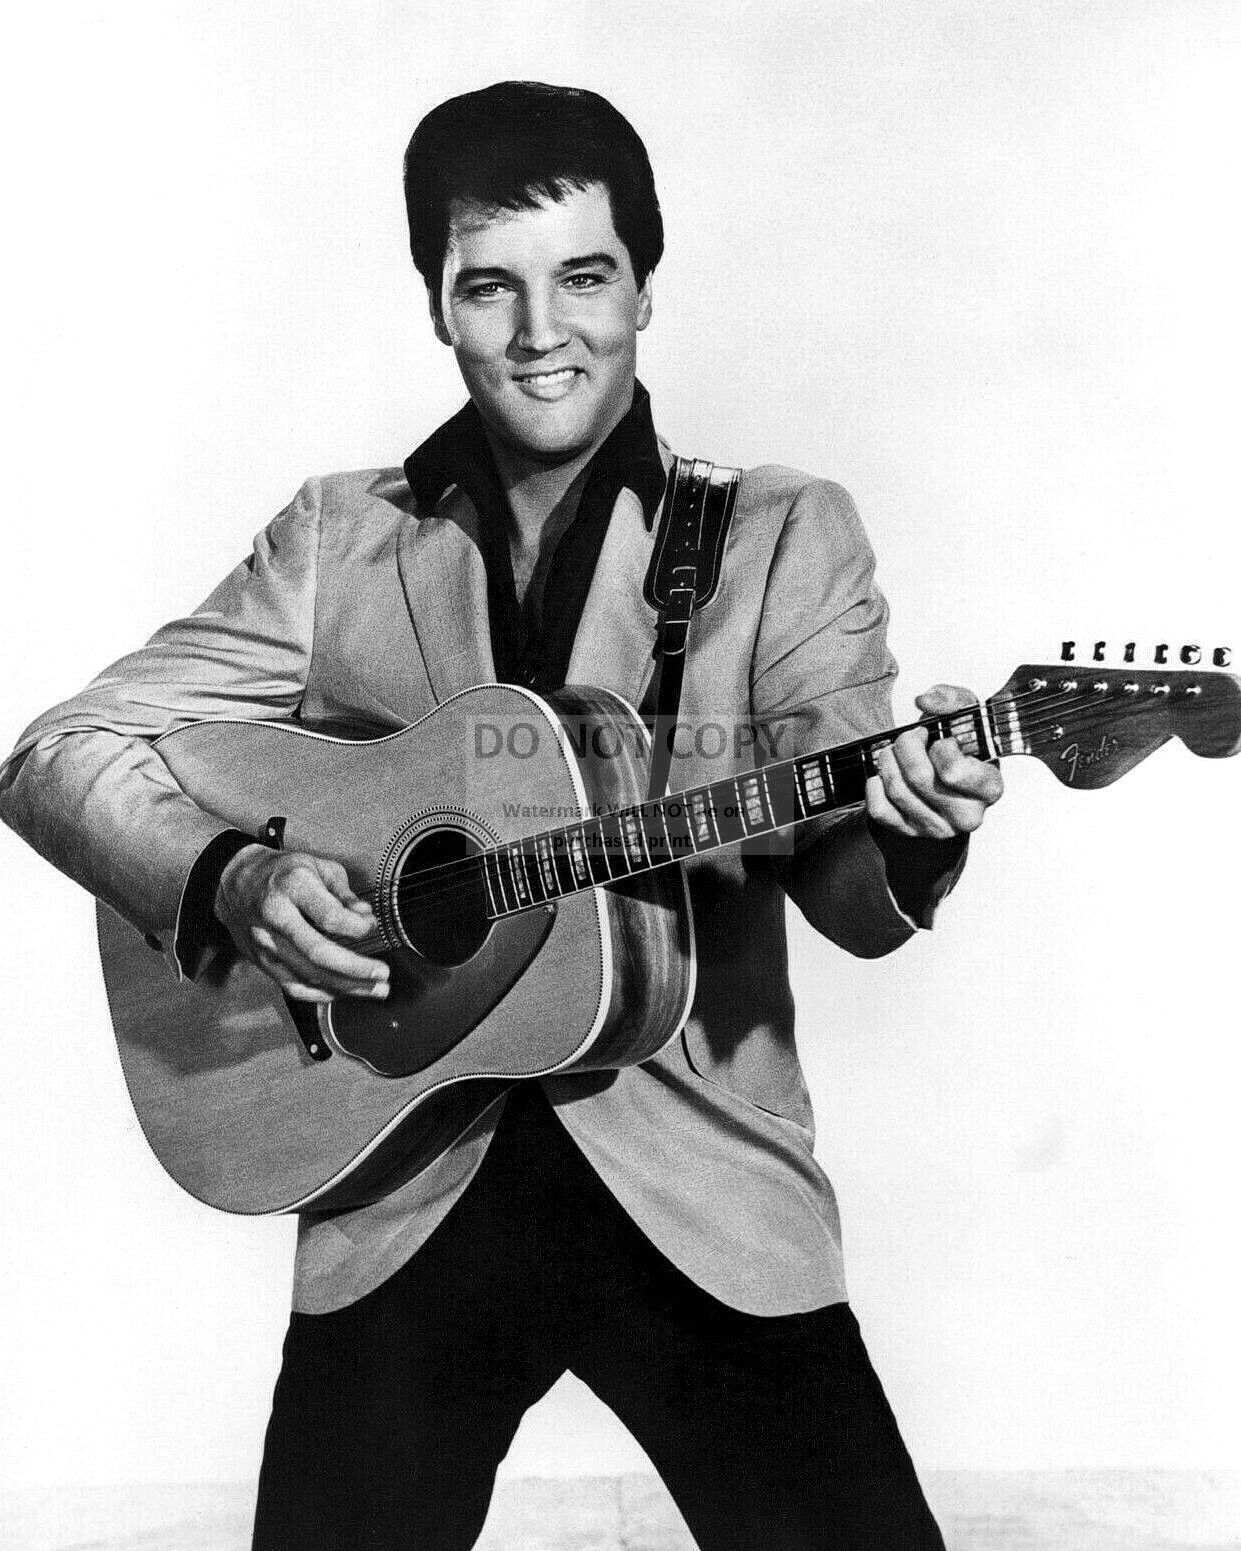 ELVIS PRESLEY LEGENDARY ENTERTAINER KING OF ROCK AND ROLL - 8X10 PHOTO (SS024)